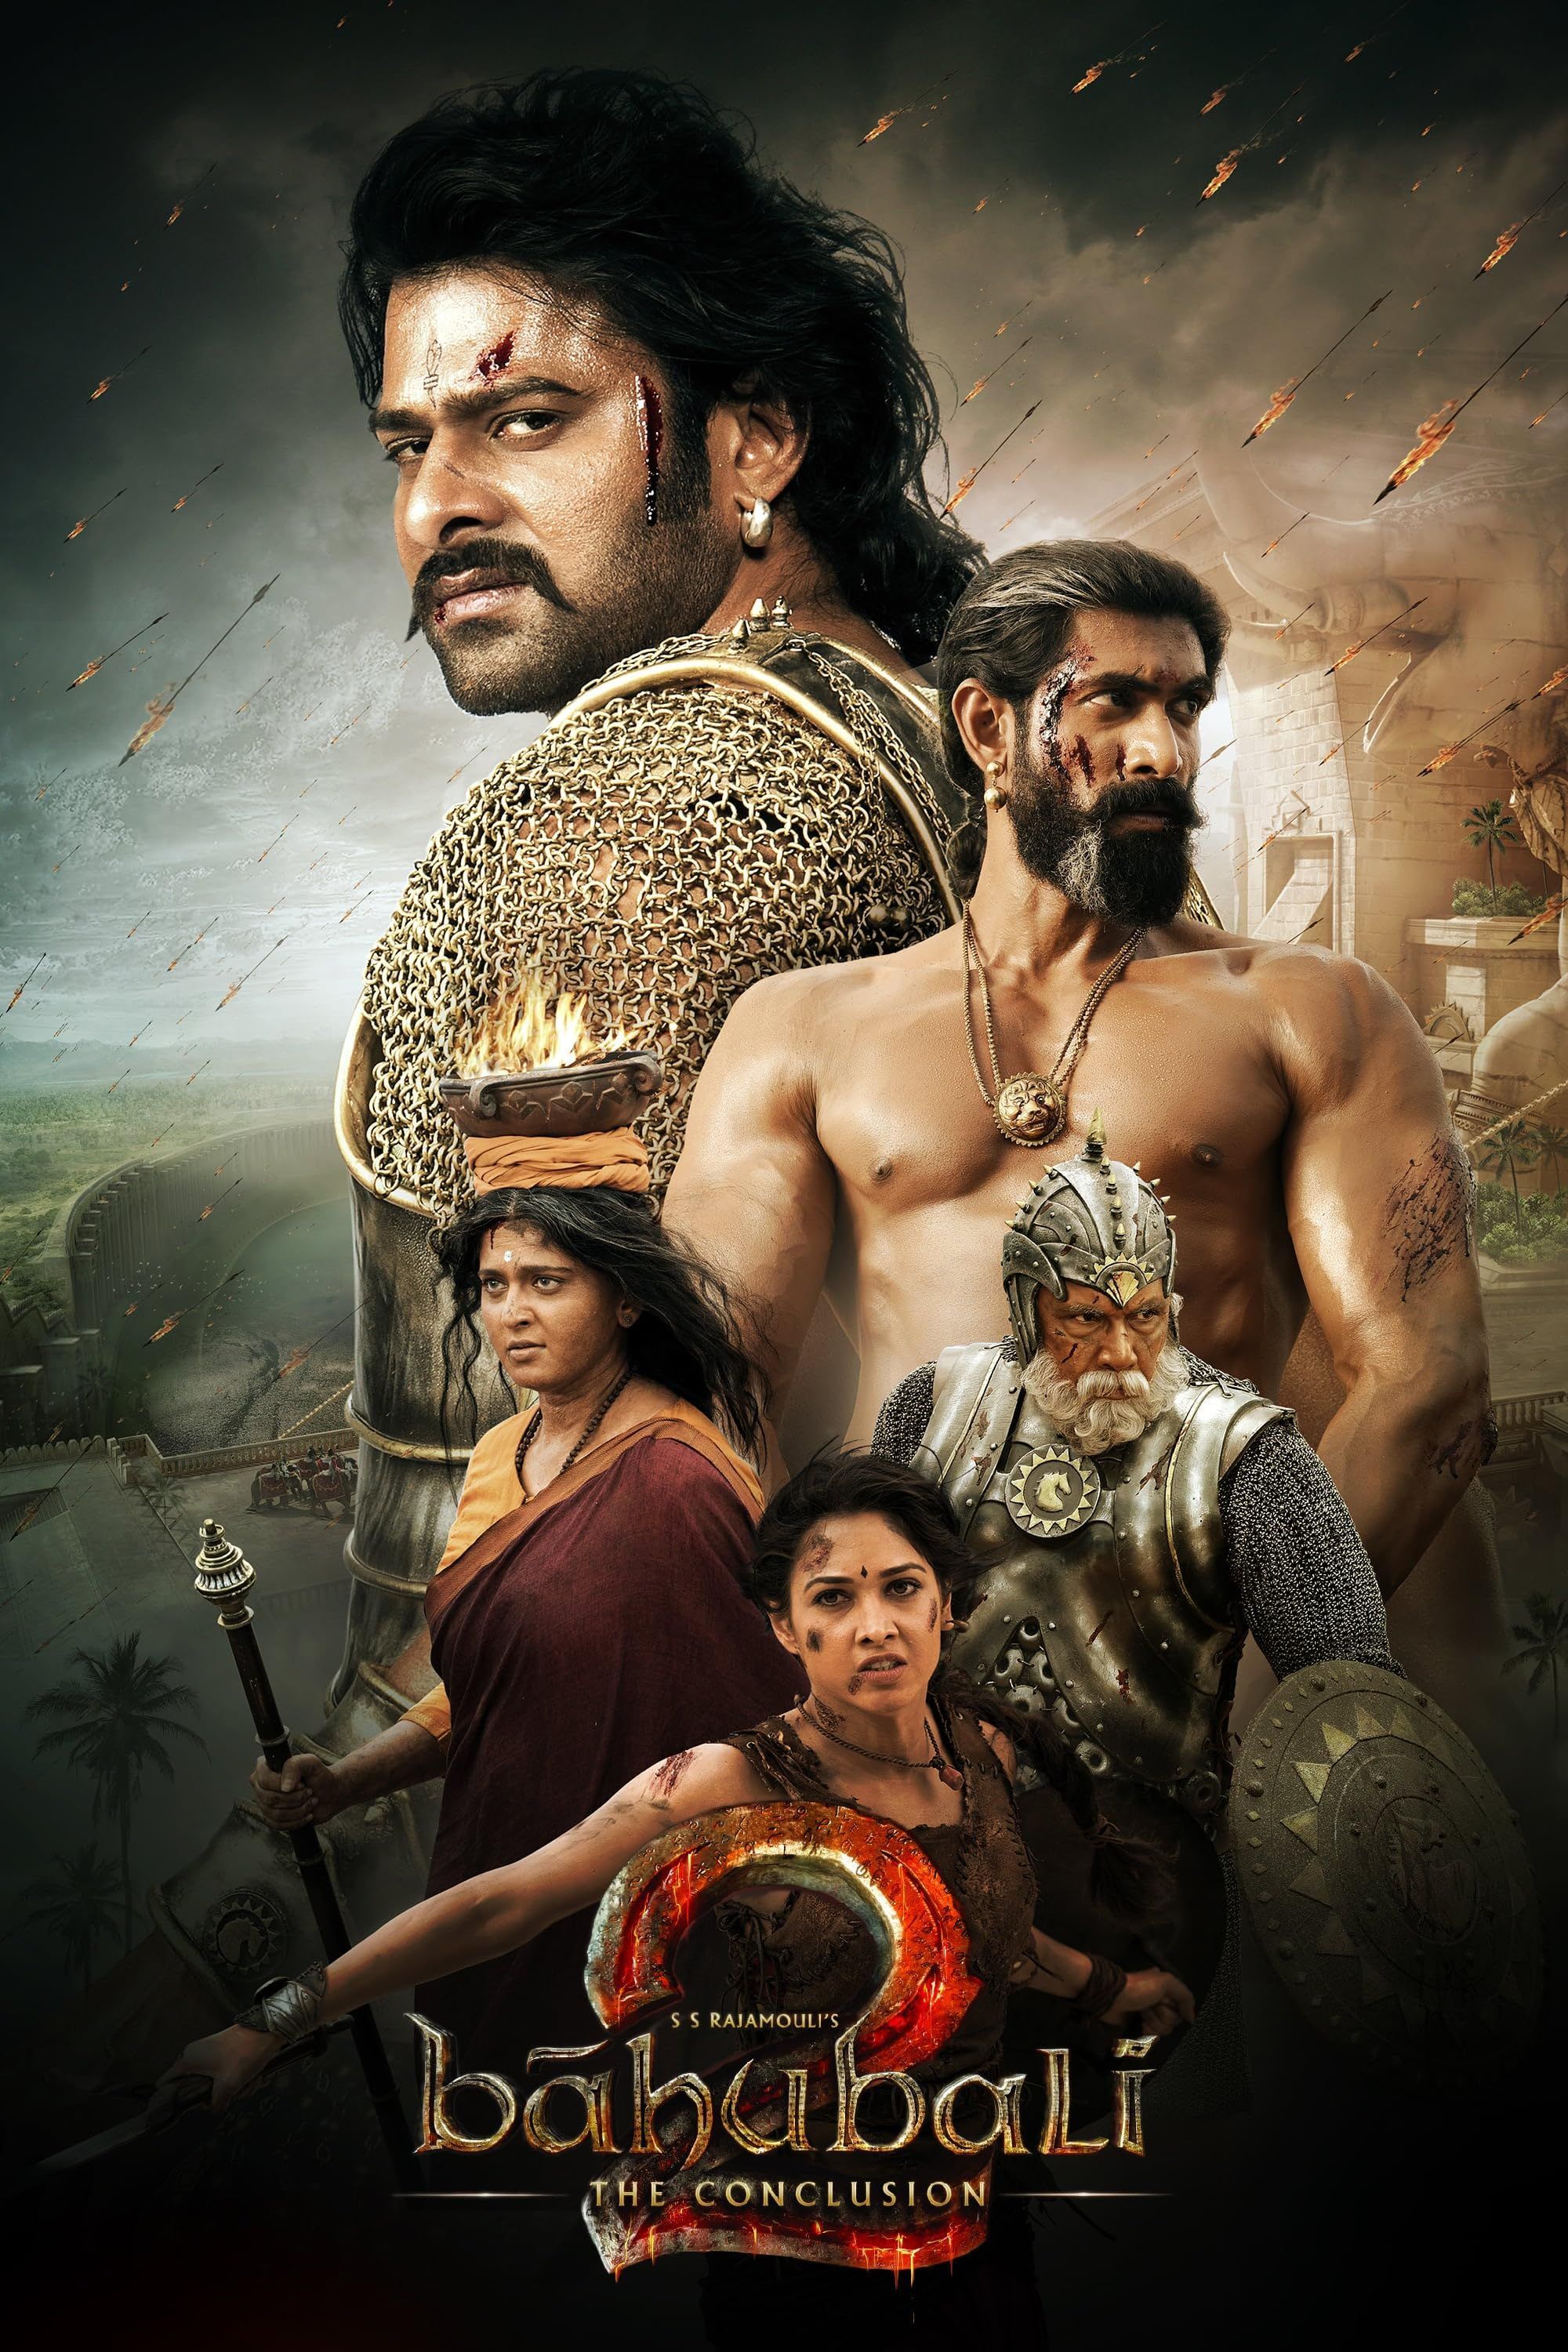 Baahubali 2 The Conclusion (2017) Hindi Dubbed ORG BluRay Full Movie 720p 480p